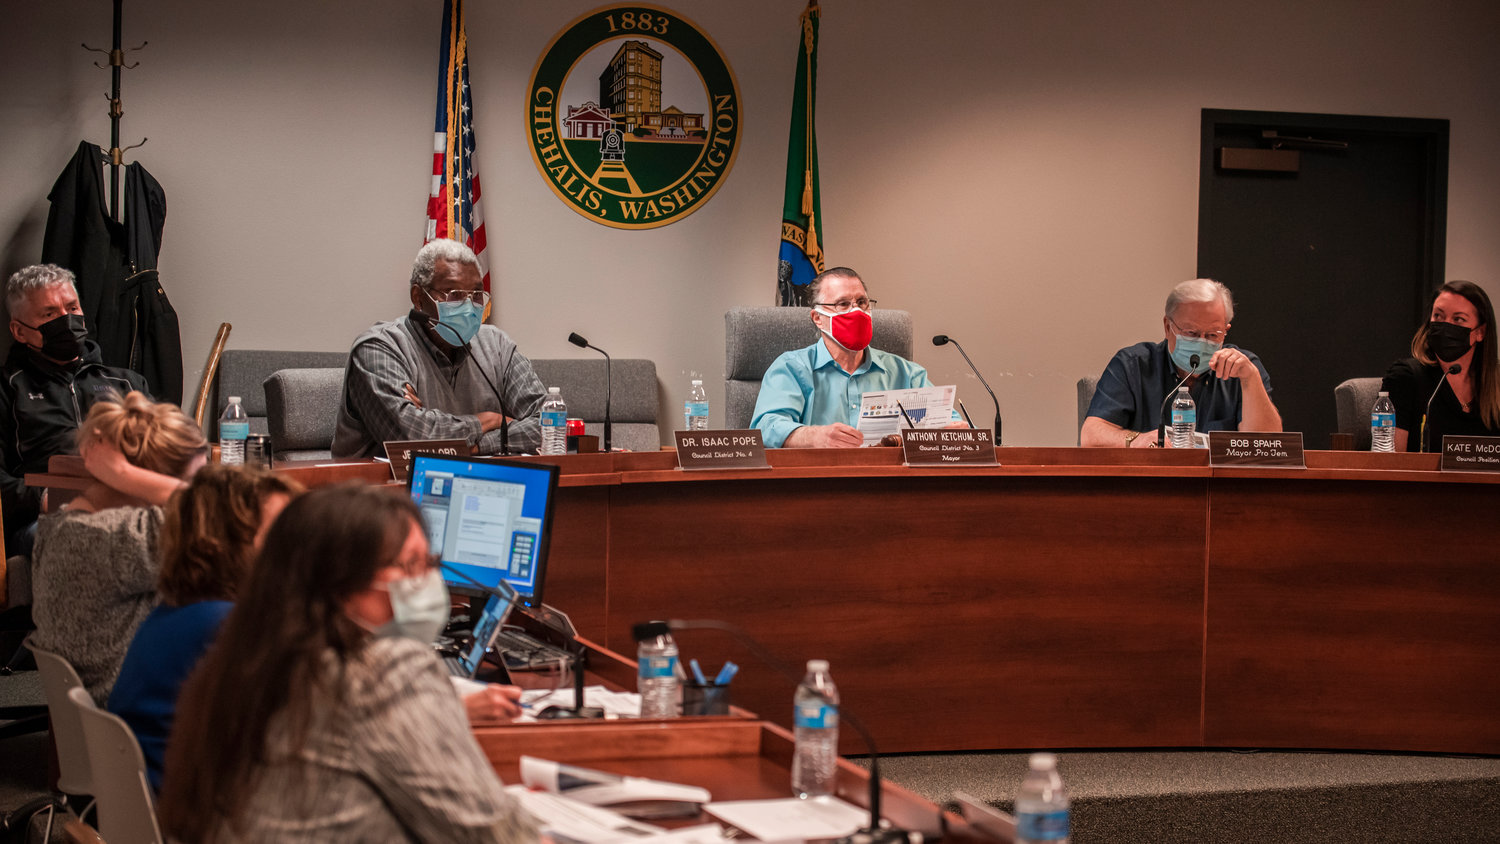 Chehalis City Council members discuss flood waters and listen to speakers during a public meeting Monday evening.